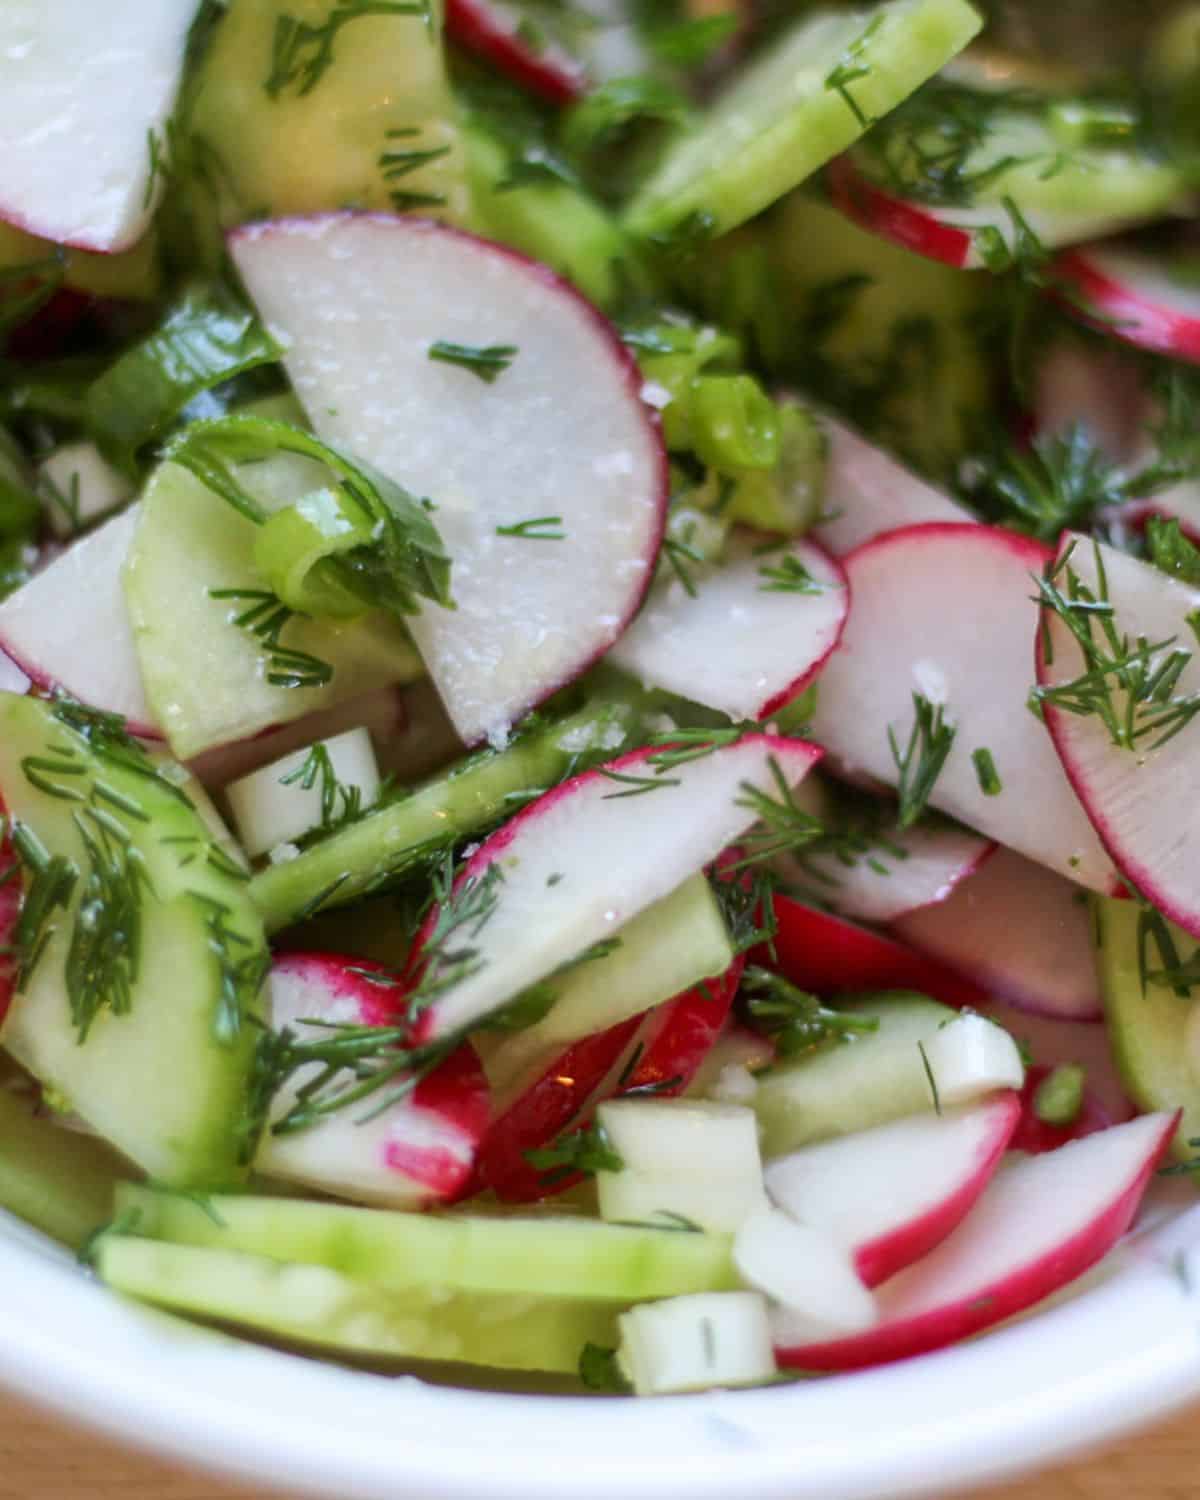 Sliced cucumbers and red radishes mixed with dill and green onions.